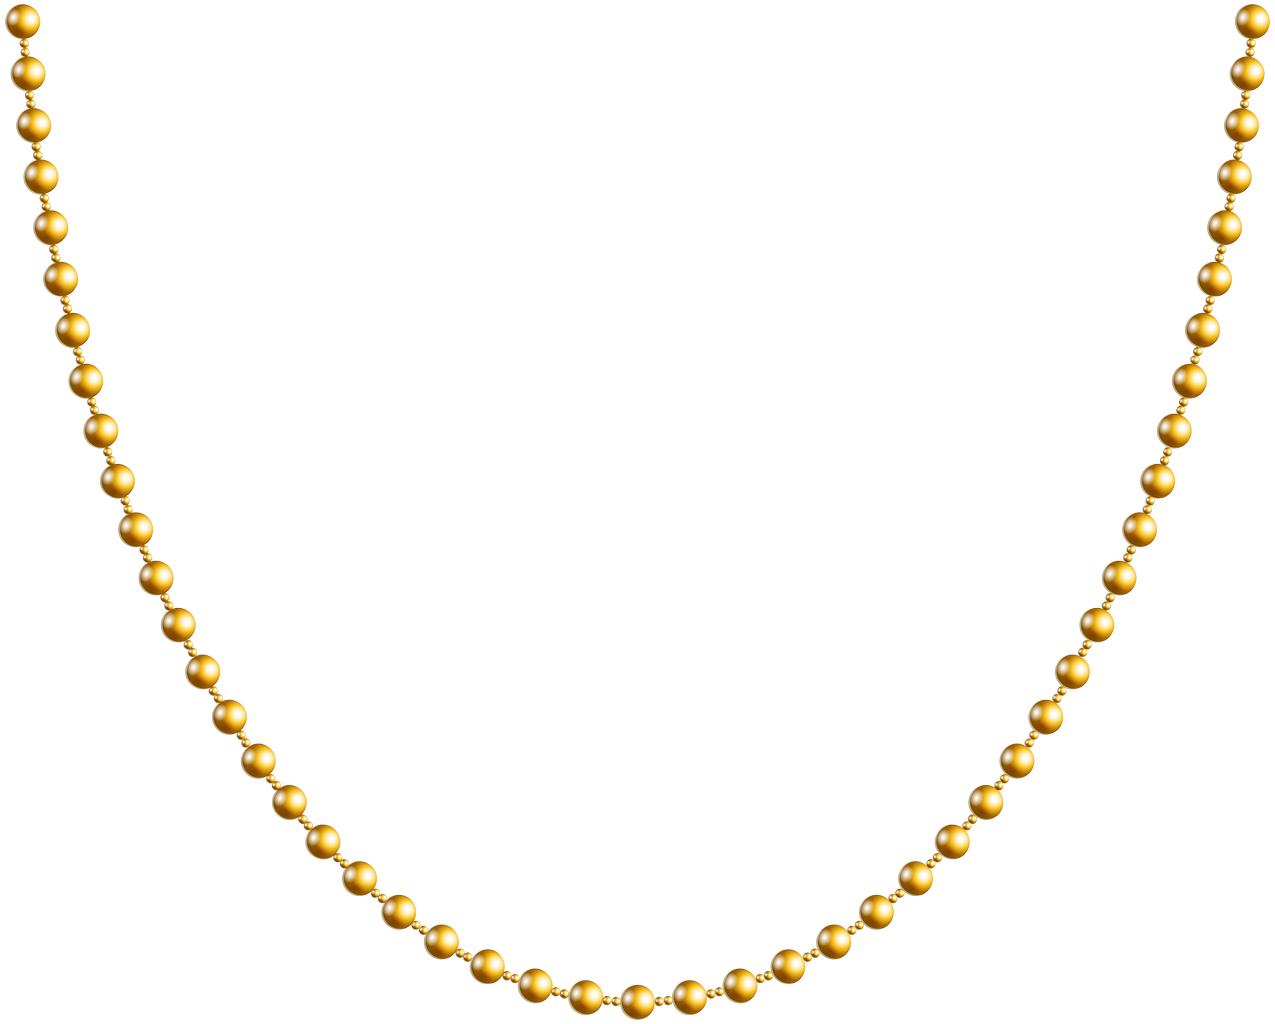 Necklace PNG Image